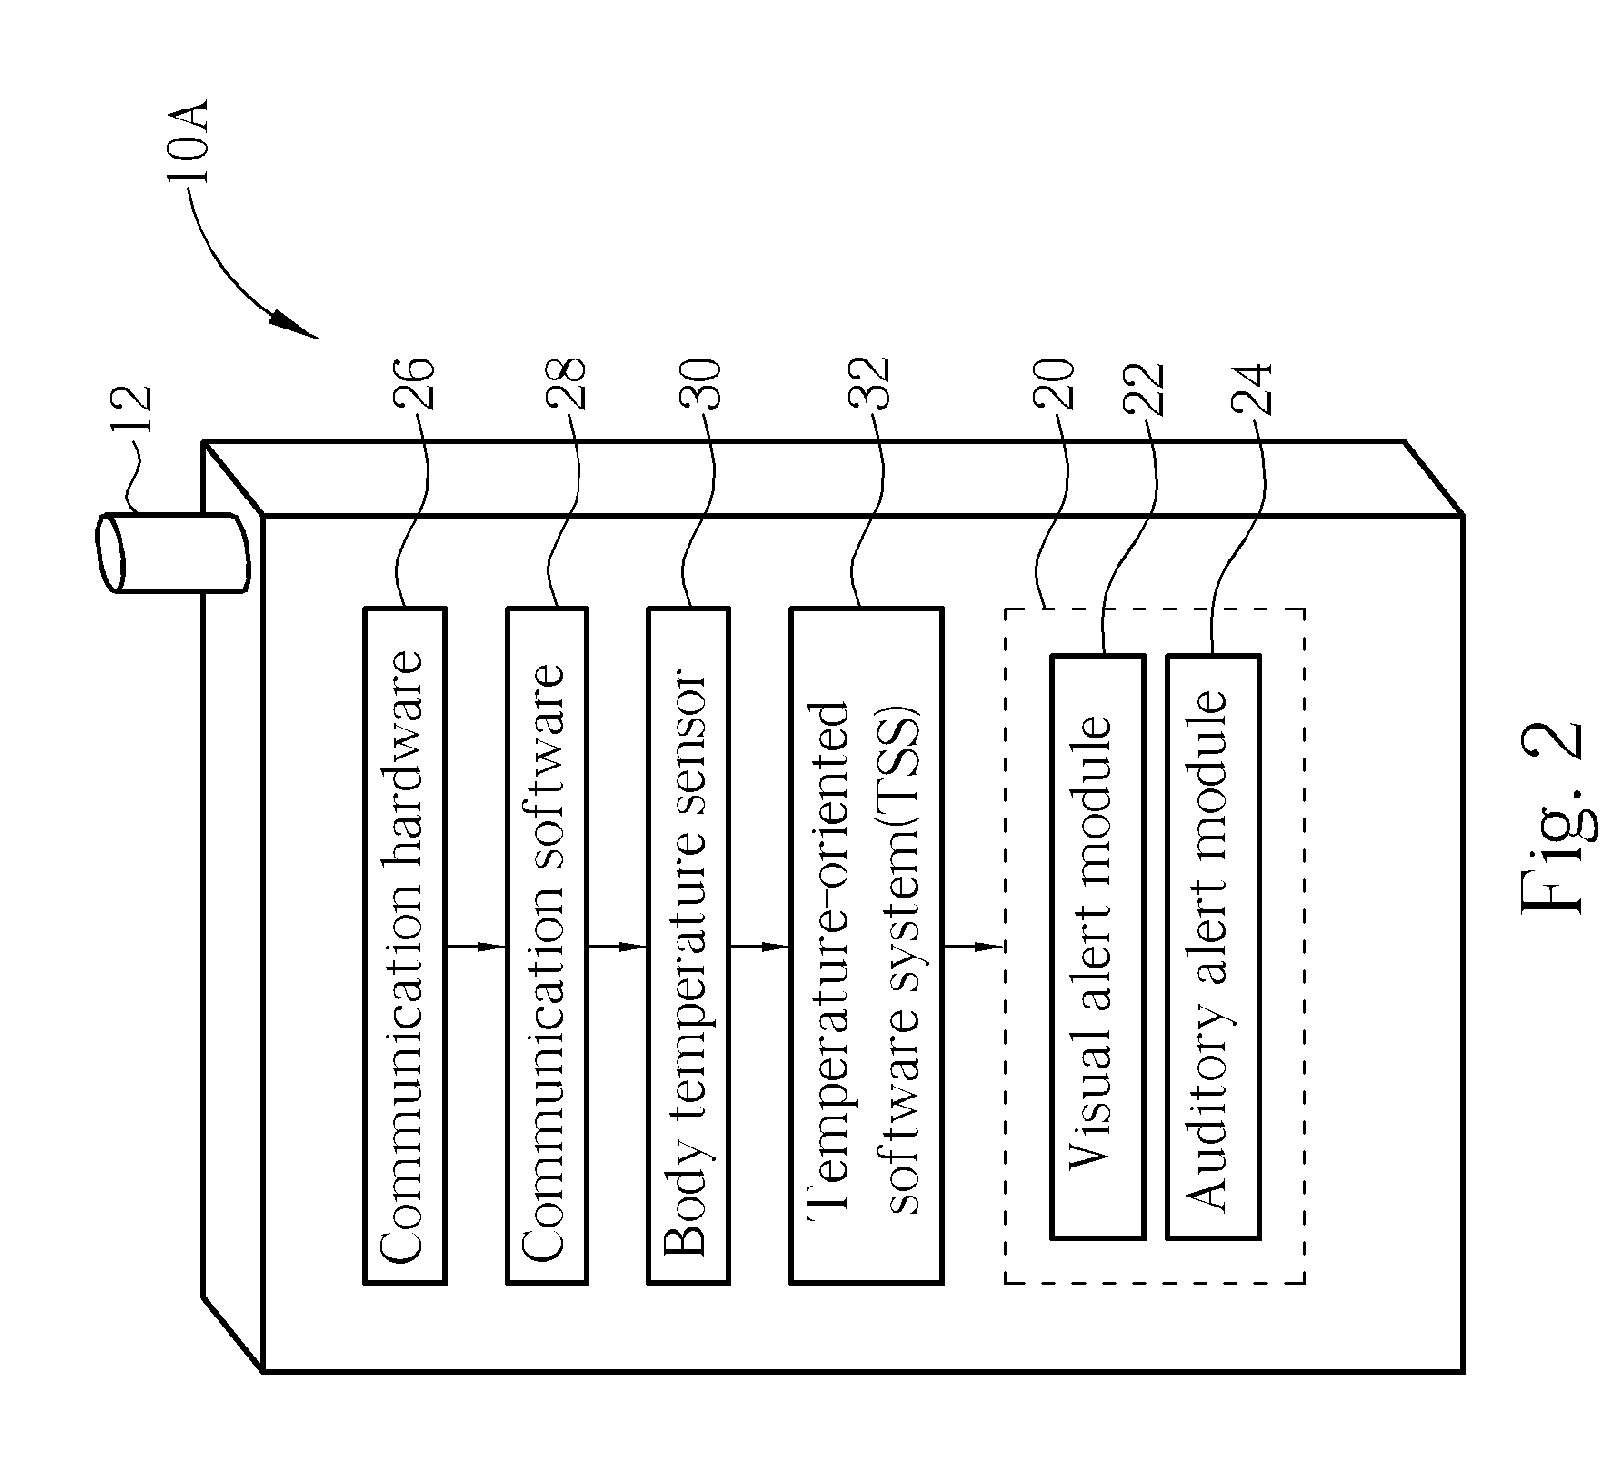 Method for changing outputting settings for a mobile unit based on user's physical status